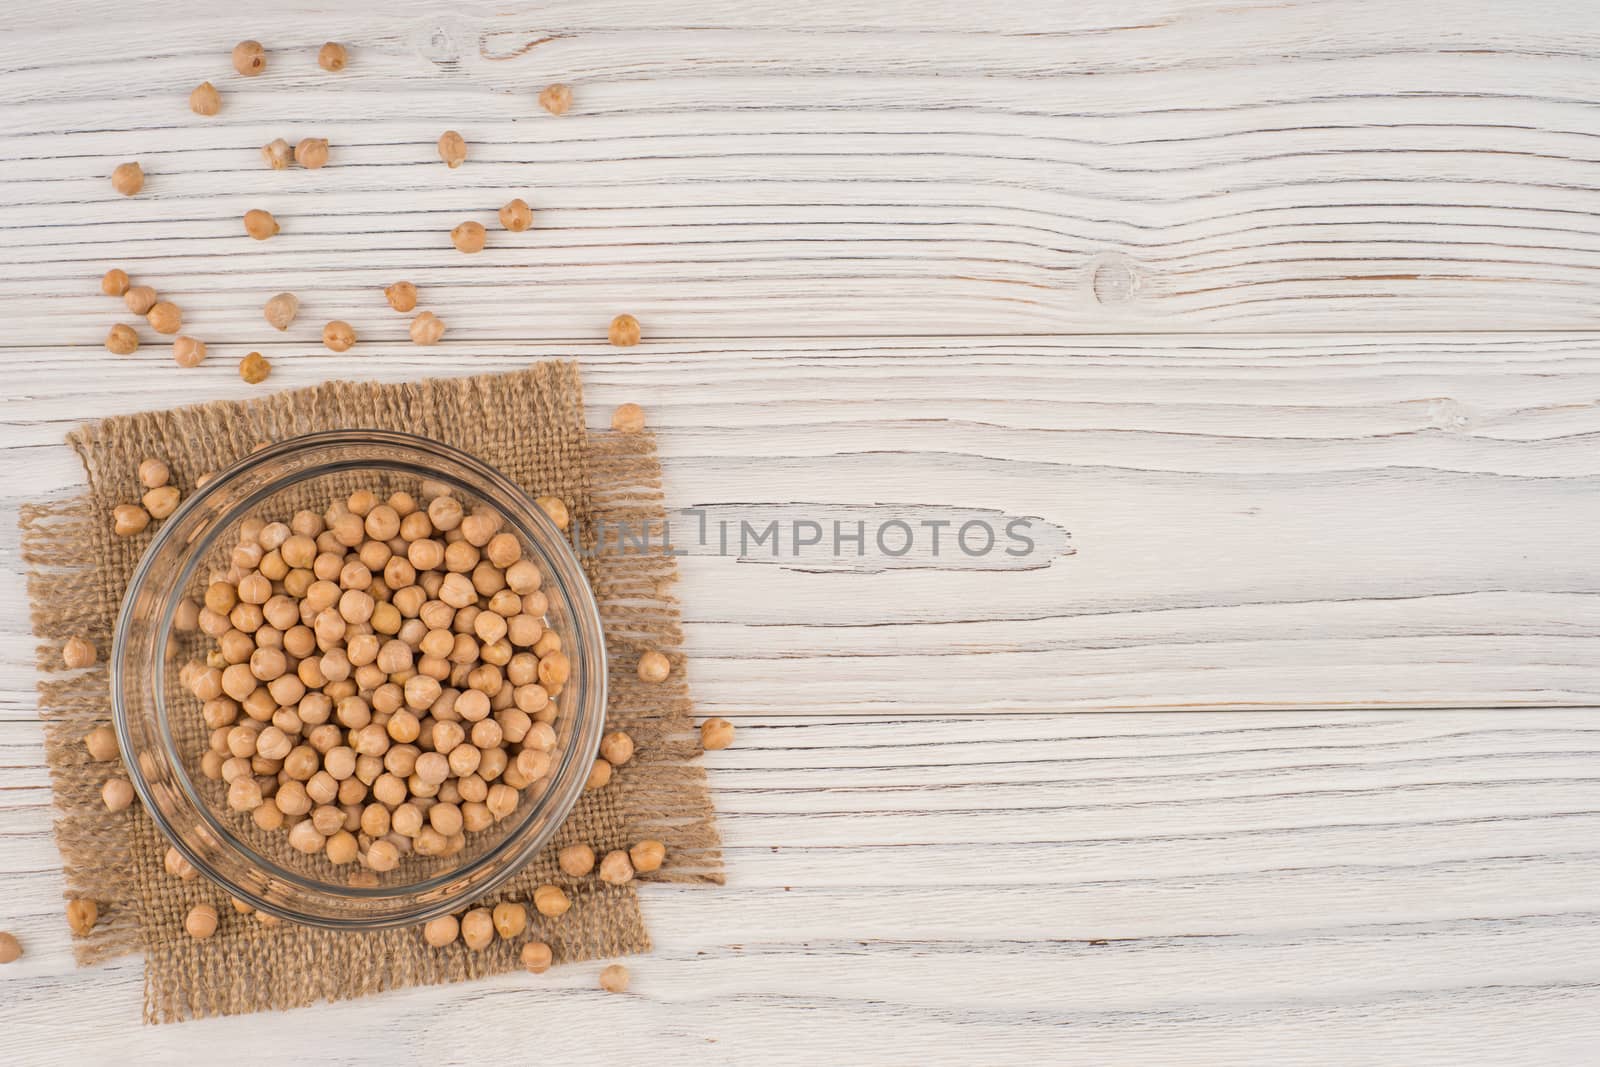 Chickpeas in a glass bowl on the old wooden table. Top view.